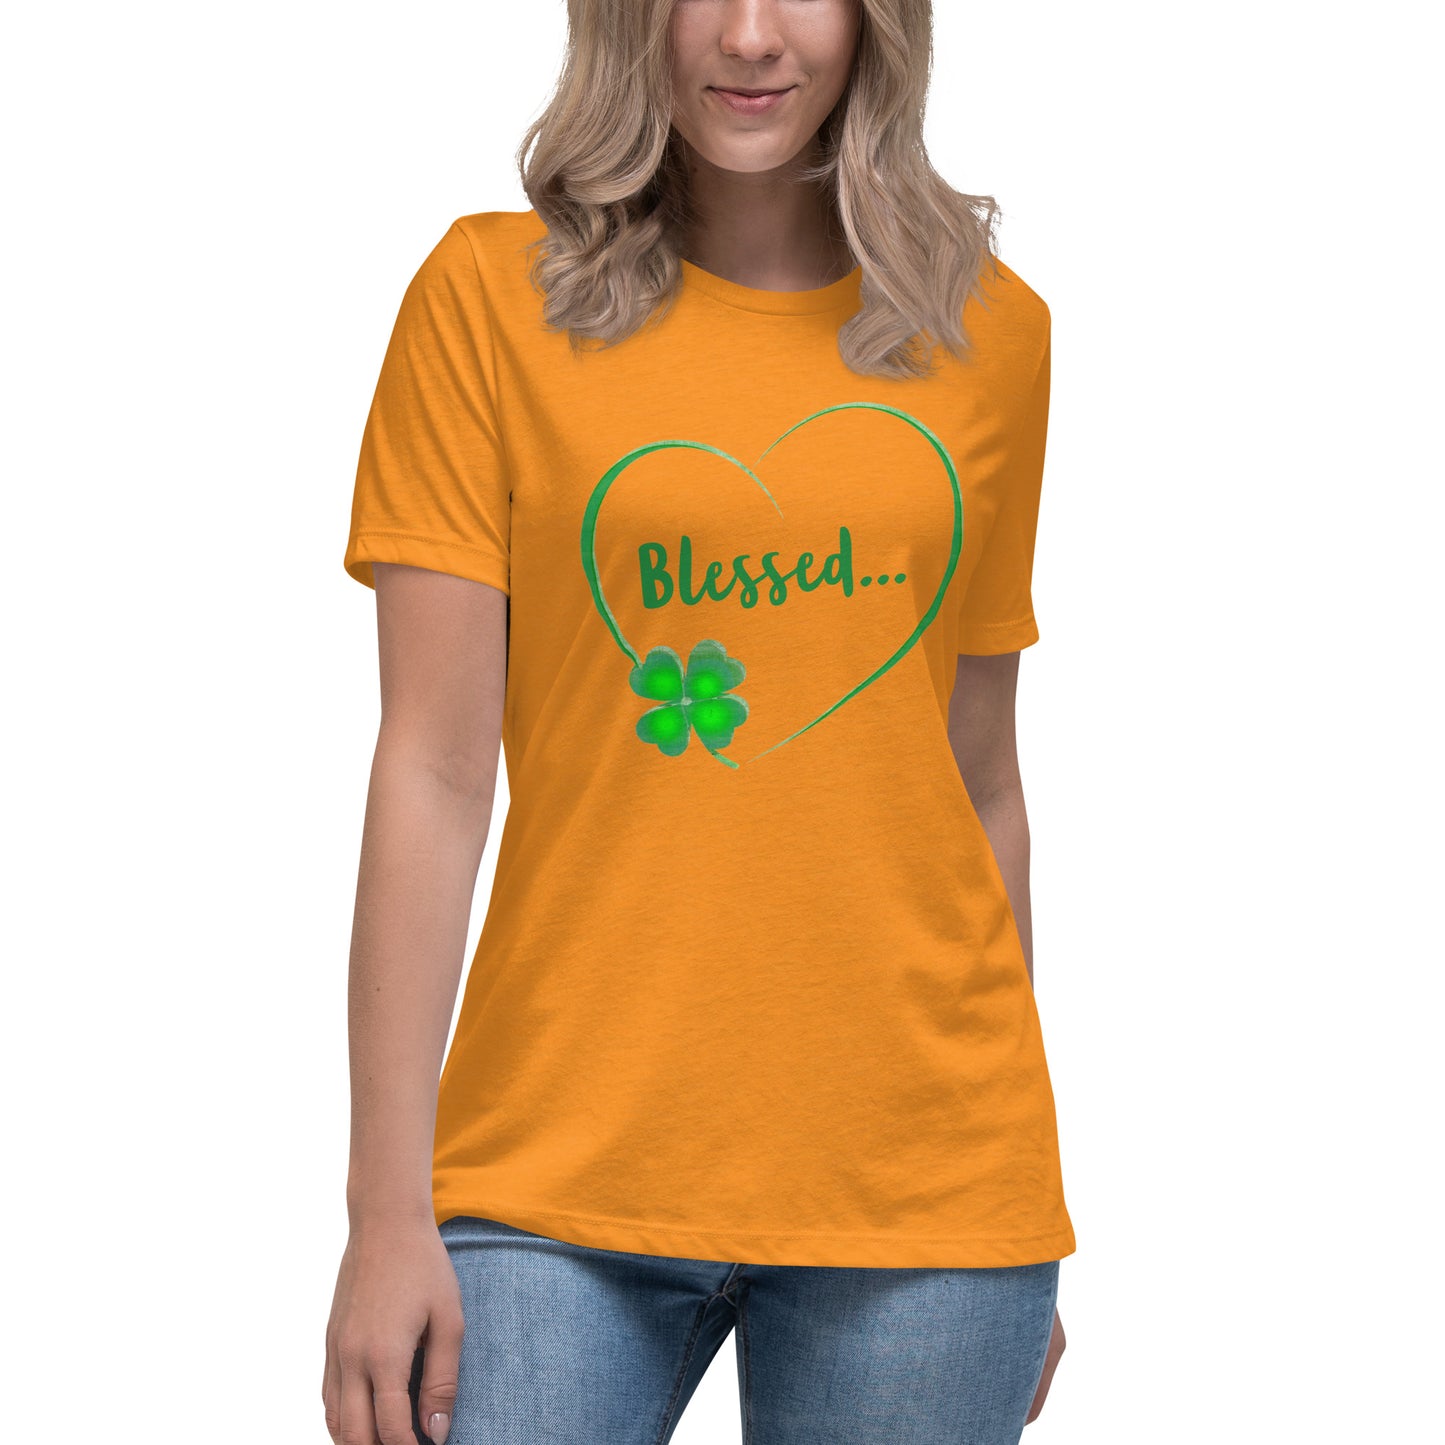 "Blessed" shamrock womens Relaxed T-Shirt